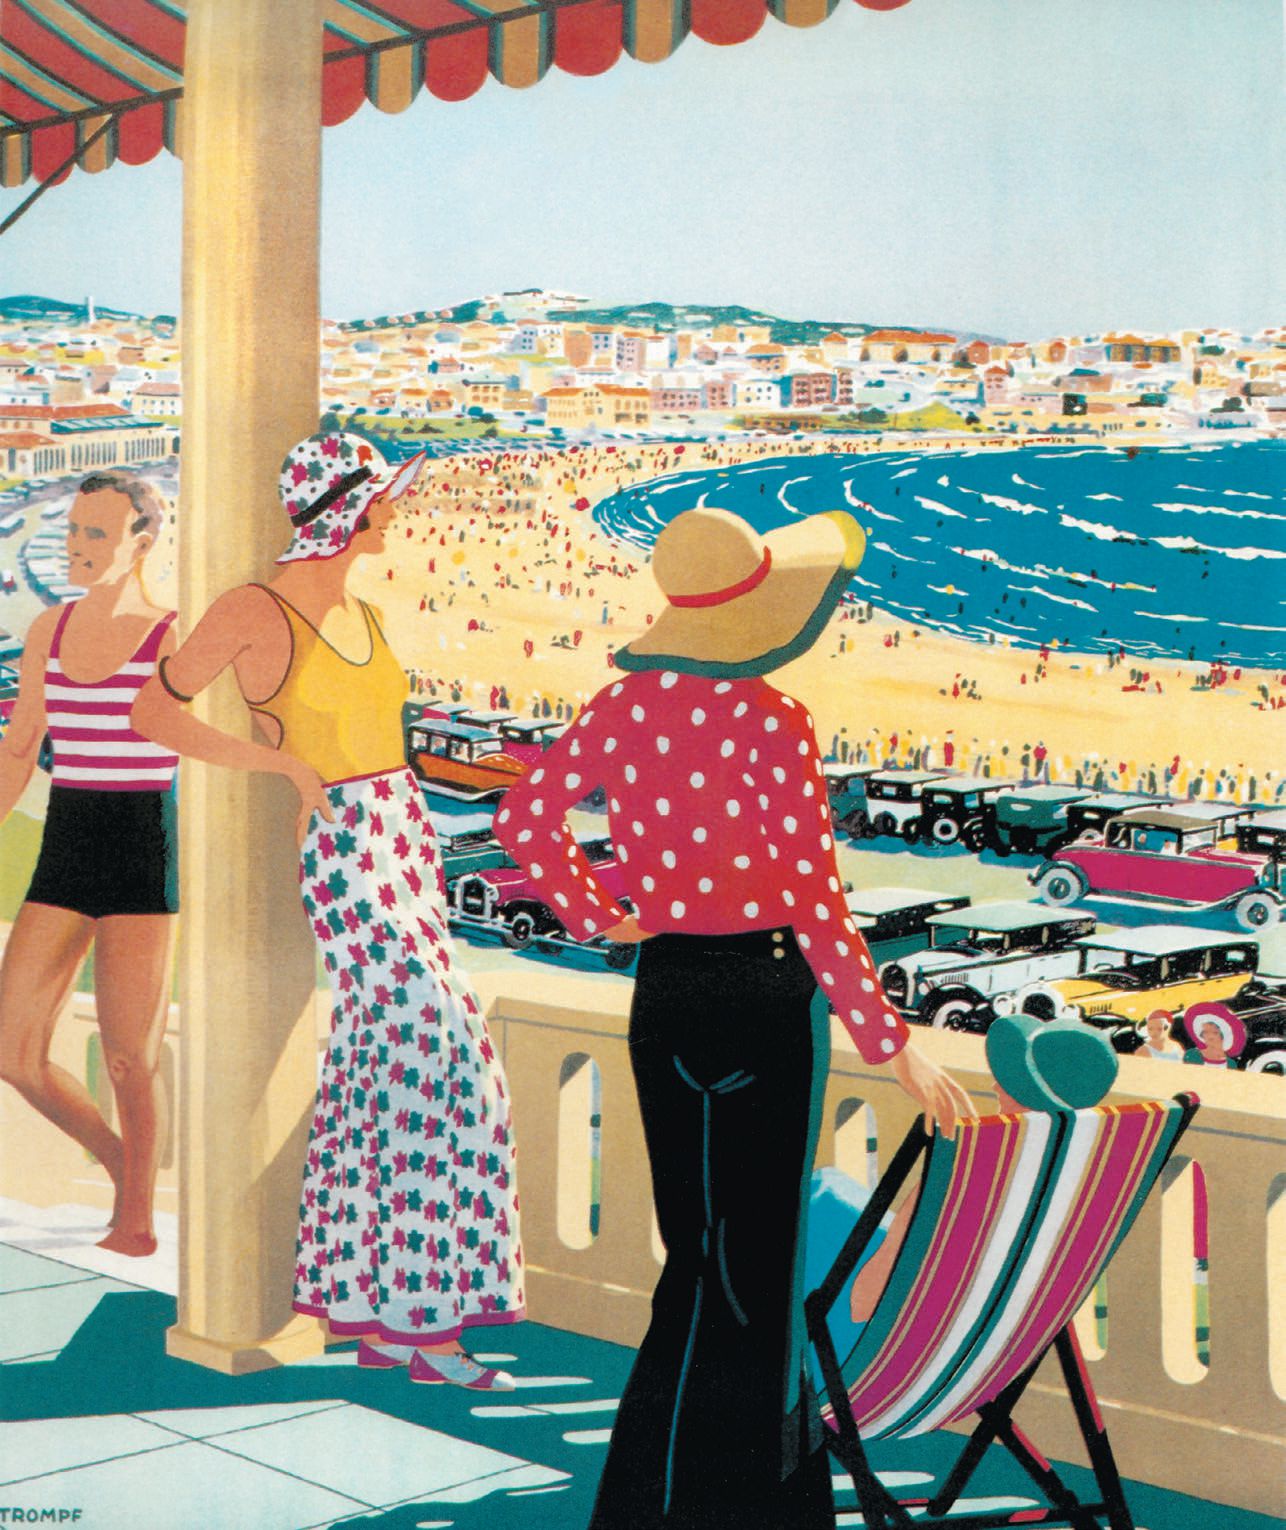 Vintage travel posters from the 20th century will be recreated in the 2022 Pageant of the Masters show, Wonderful World. PHOTO COURTESY OF FESTIVAL OF ARTS OF LAGUNA BEACH